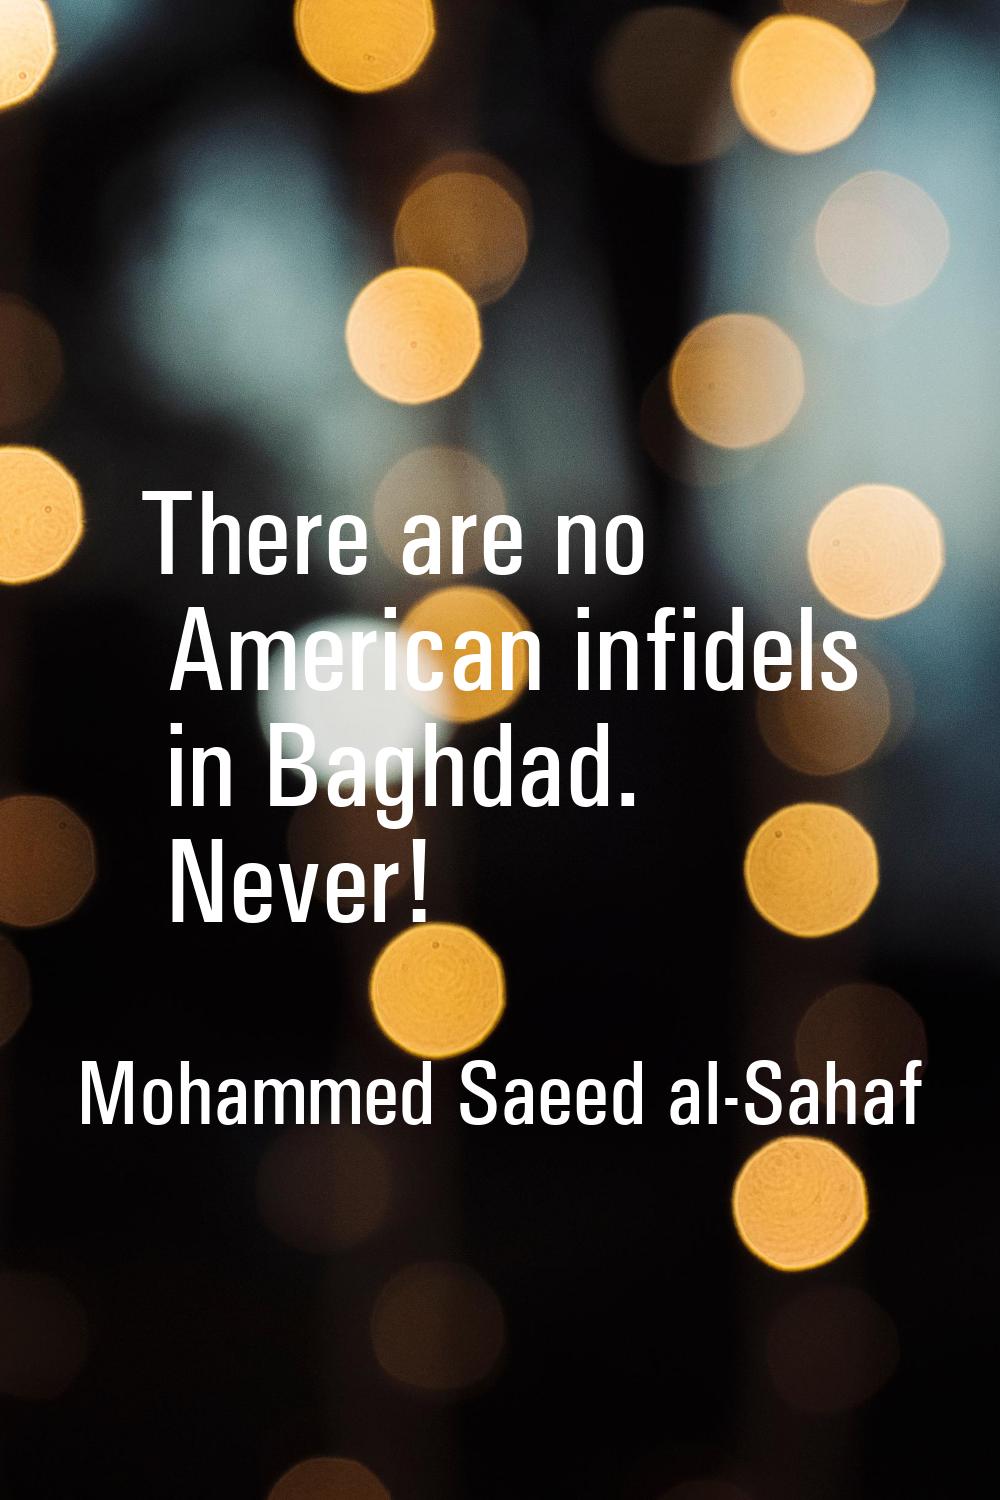 There are no American infidels in Baghdad. Never!